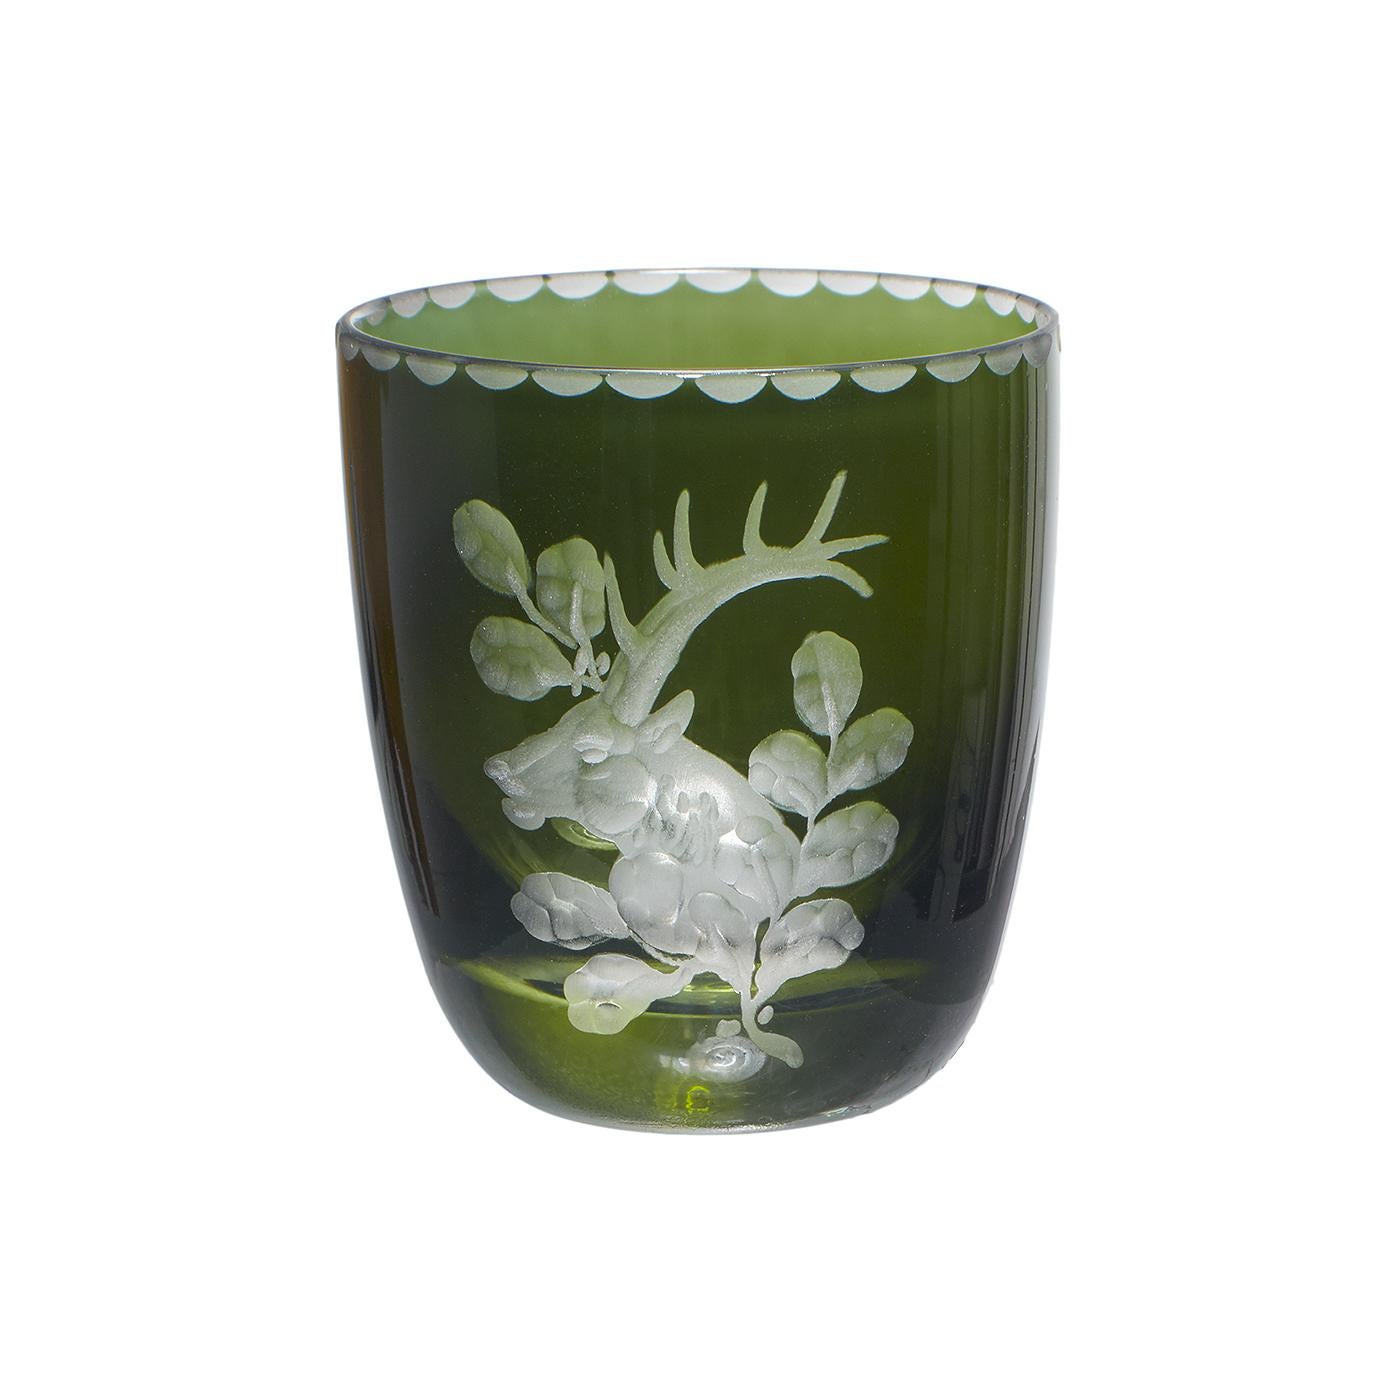 Set of six hand blown schnapps glasses in green crystal with a hand-edged hunting decor. The decor is an antique Black Forest style scene, showing a deer with leaves. Not recommended for dishwasher use.